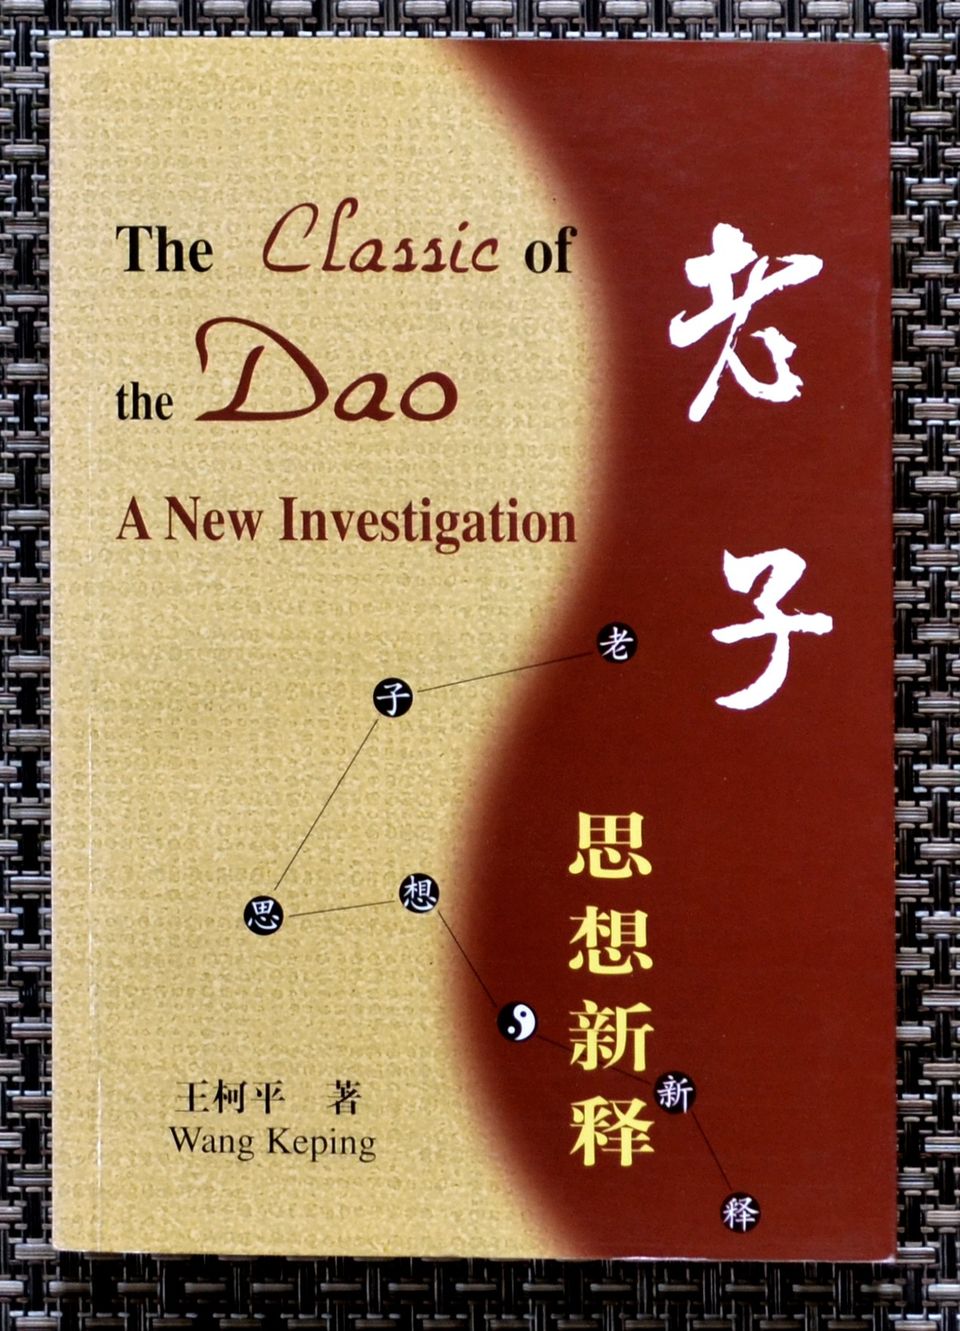 The Classic of the Dao a New Investigation, kirja taolaisuudesta